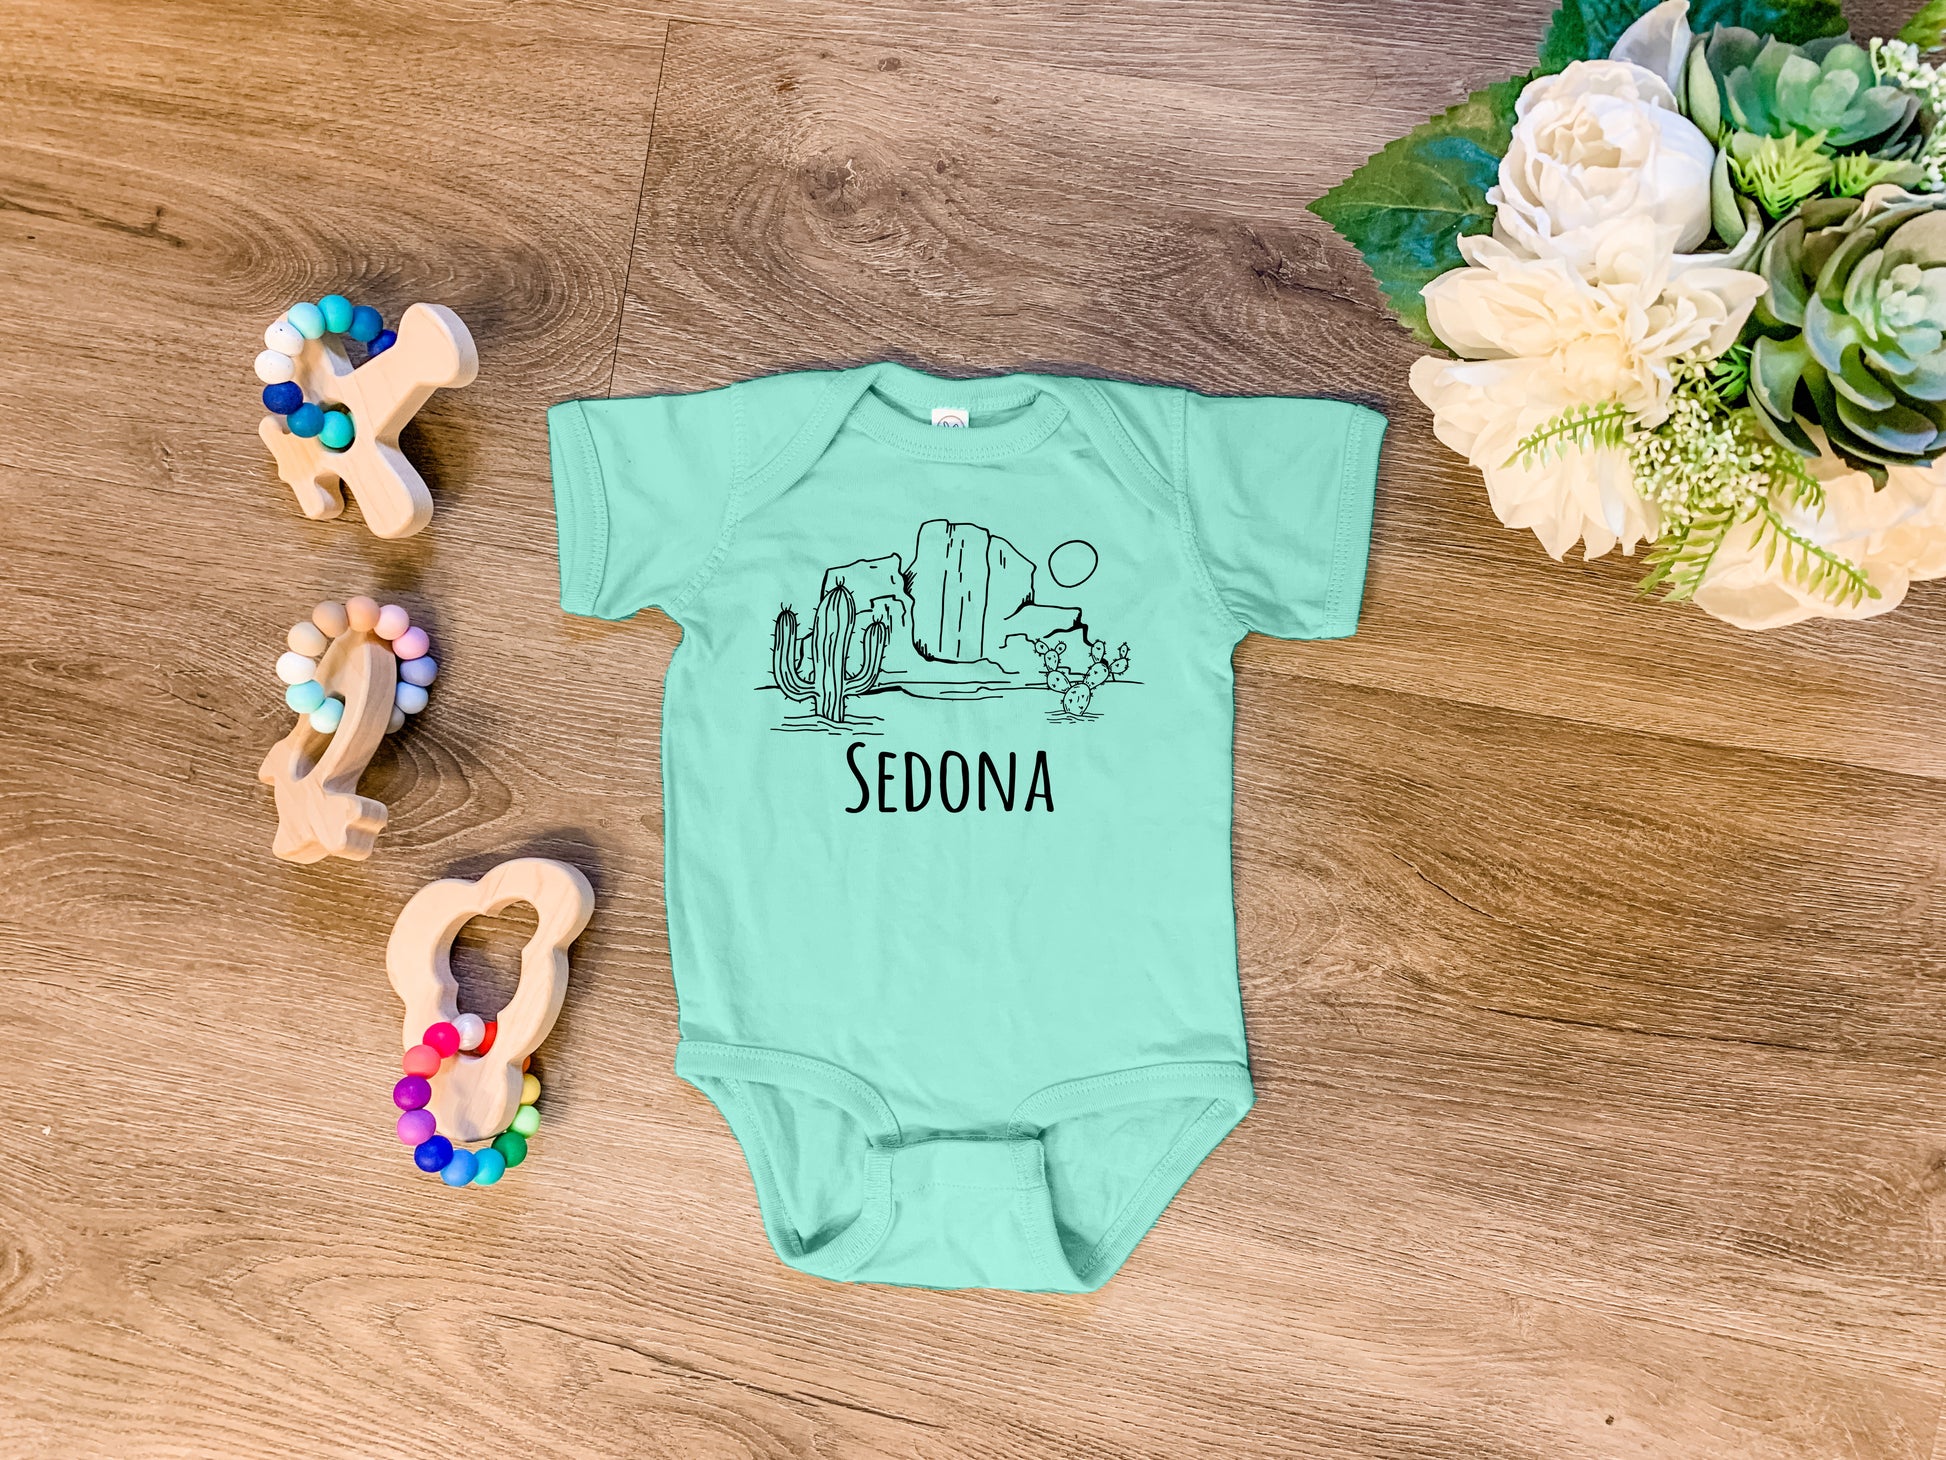 a baby's bodysuit with the word sedona on it next to